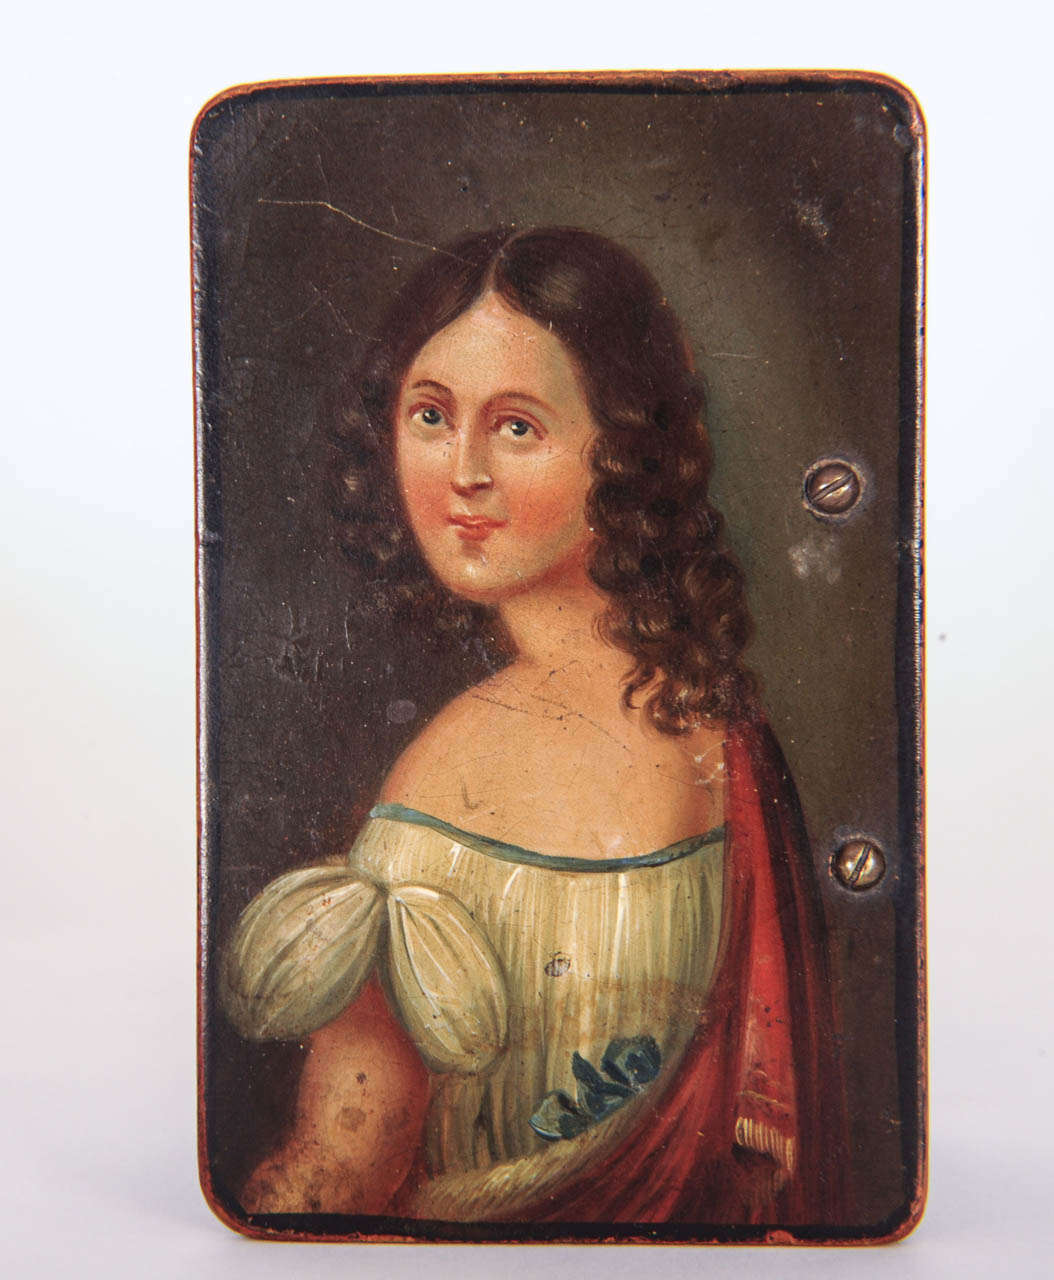 circa 1880 Music box Swiss origin. Playijg 2 tunes ([lays 2 tunes after activating) there is a button to stop it as ell. Painted with an image of a beautiful lady from the Belle Epoque (Romatique school). 